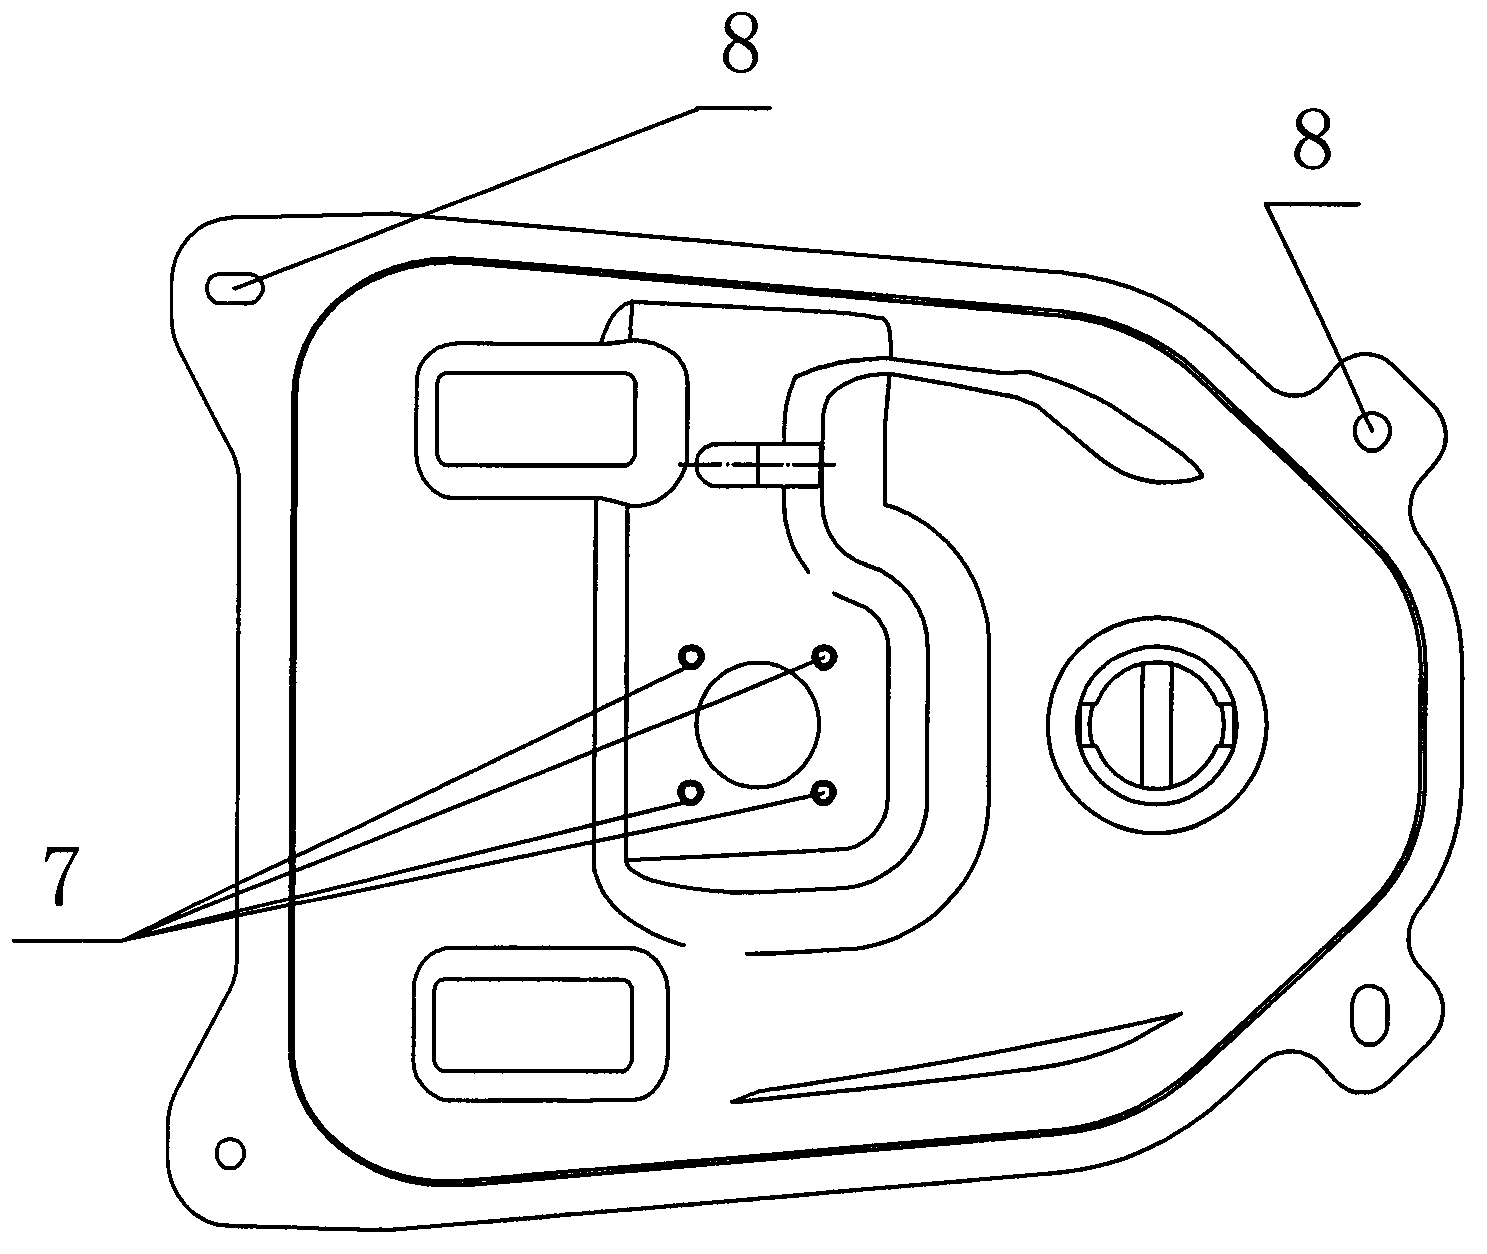 Fuel tank structure of motorcycle